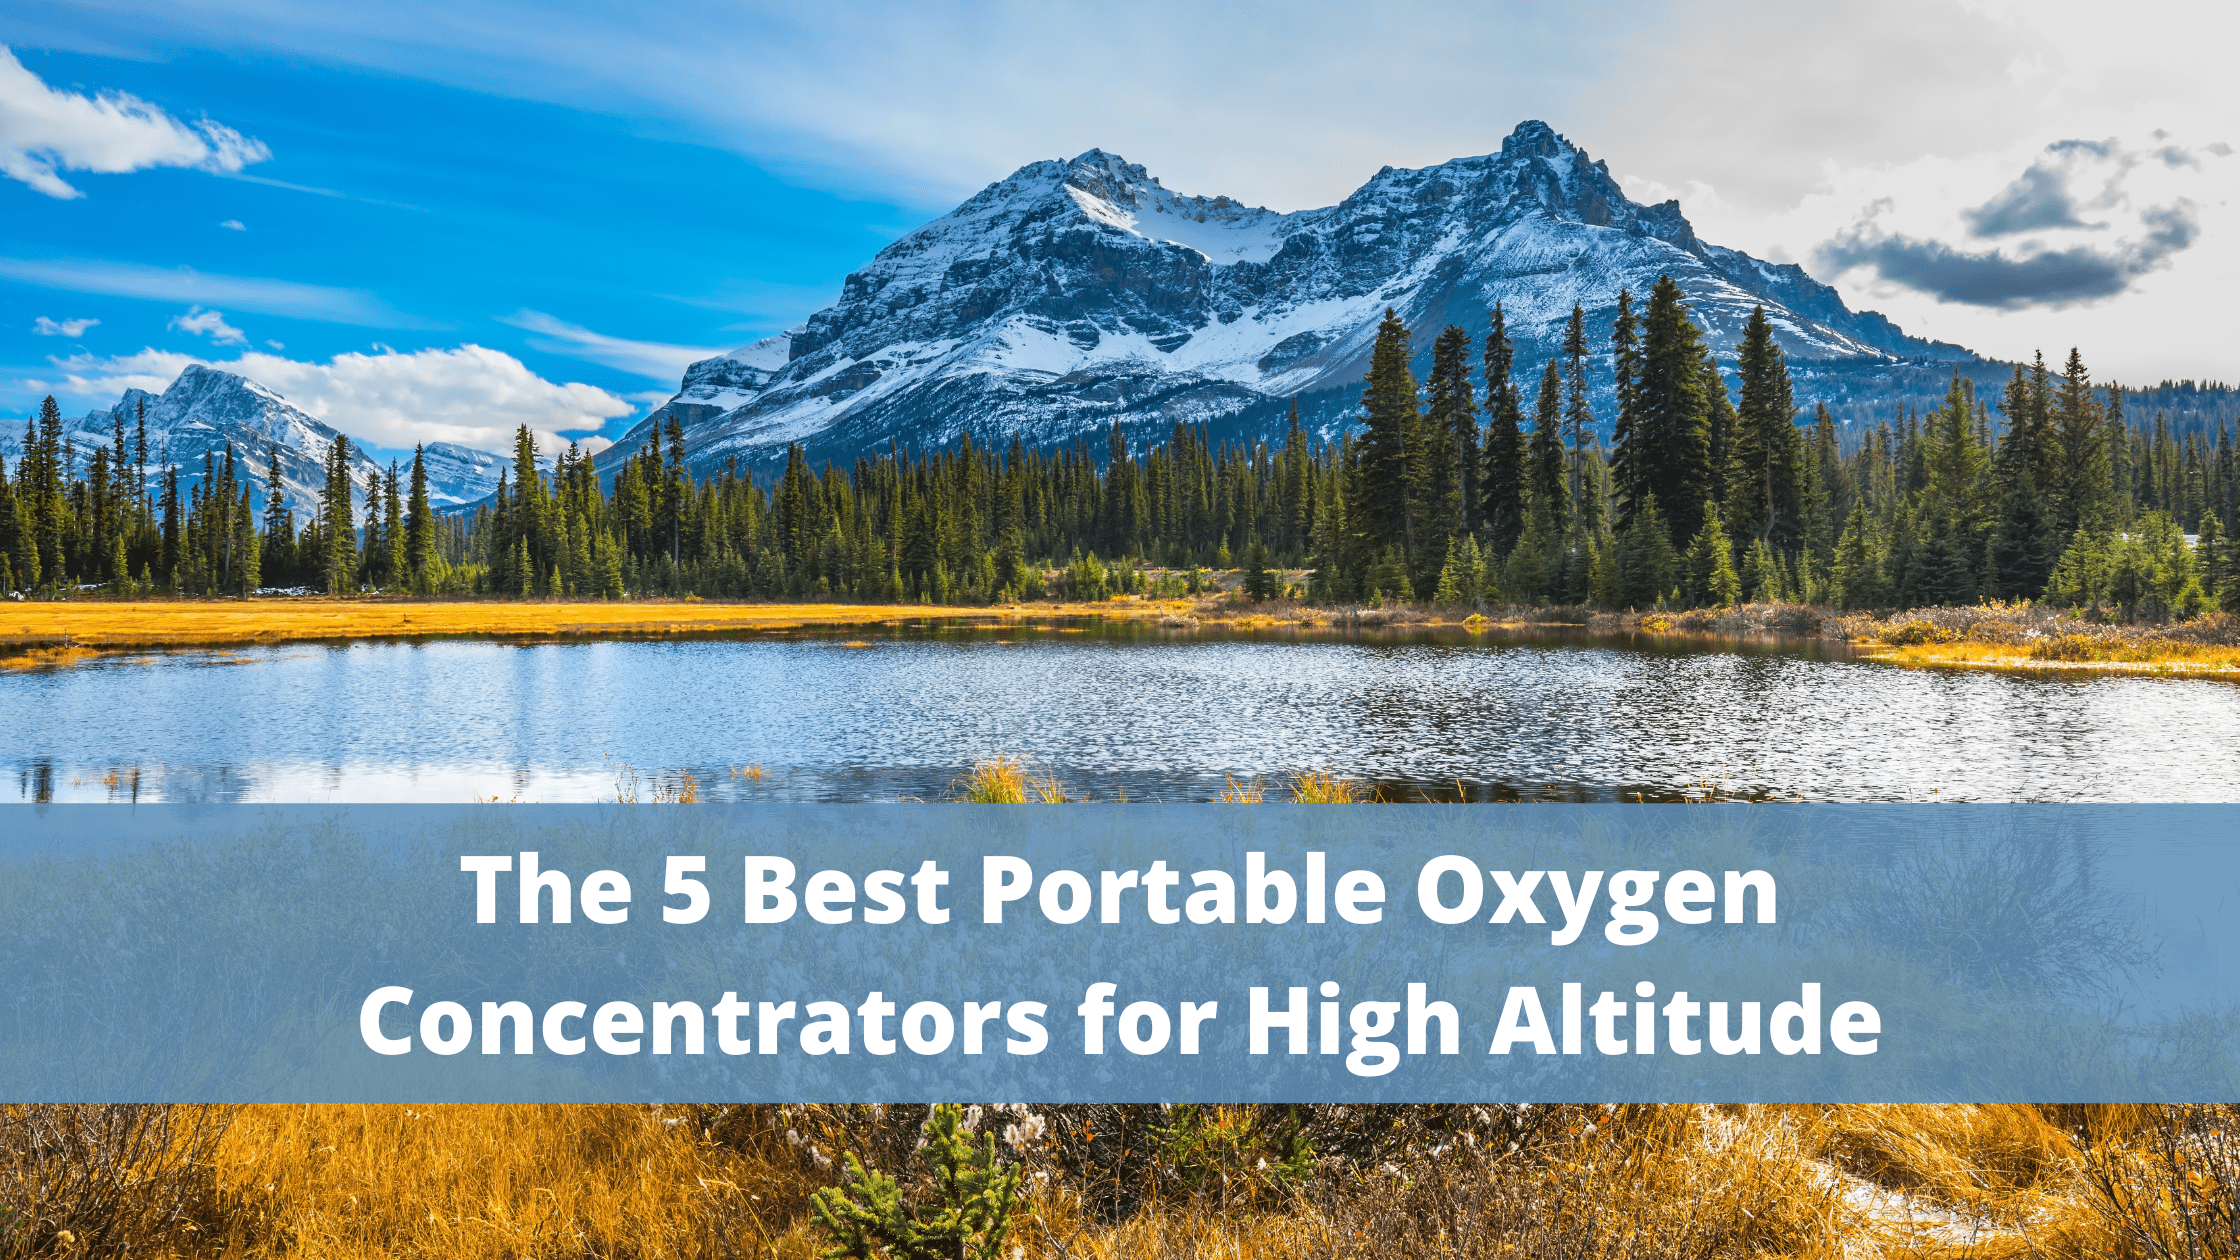 The 5 Best Portable Oxygen Concentrators for High Altitude